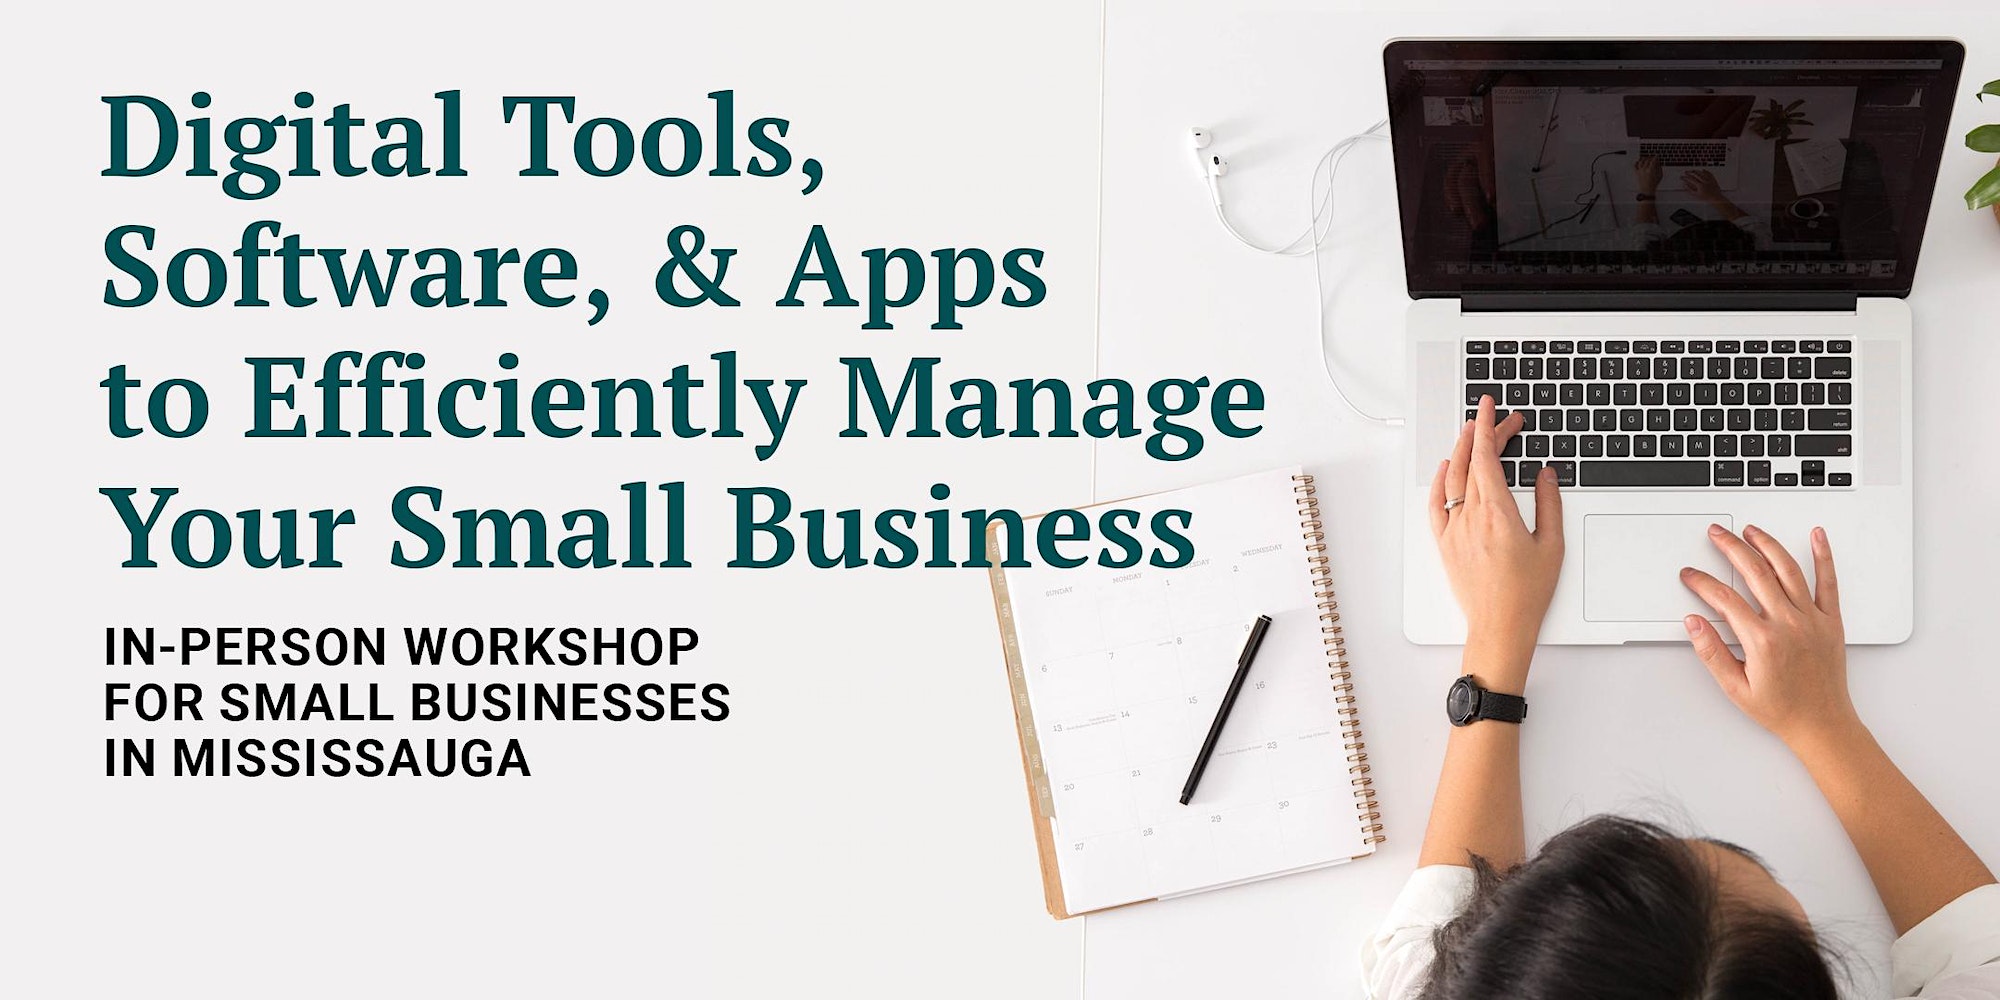 Digital tools, software, & apps to efficiently manage your small business. In-person workshop in Kawartha Lakes